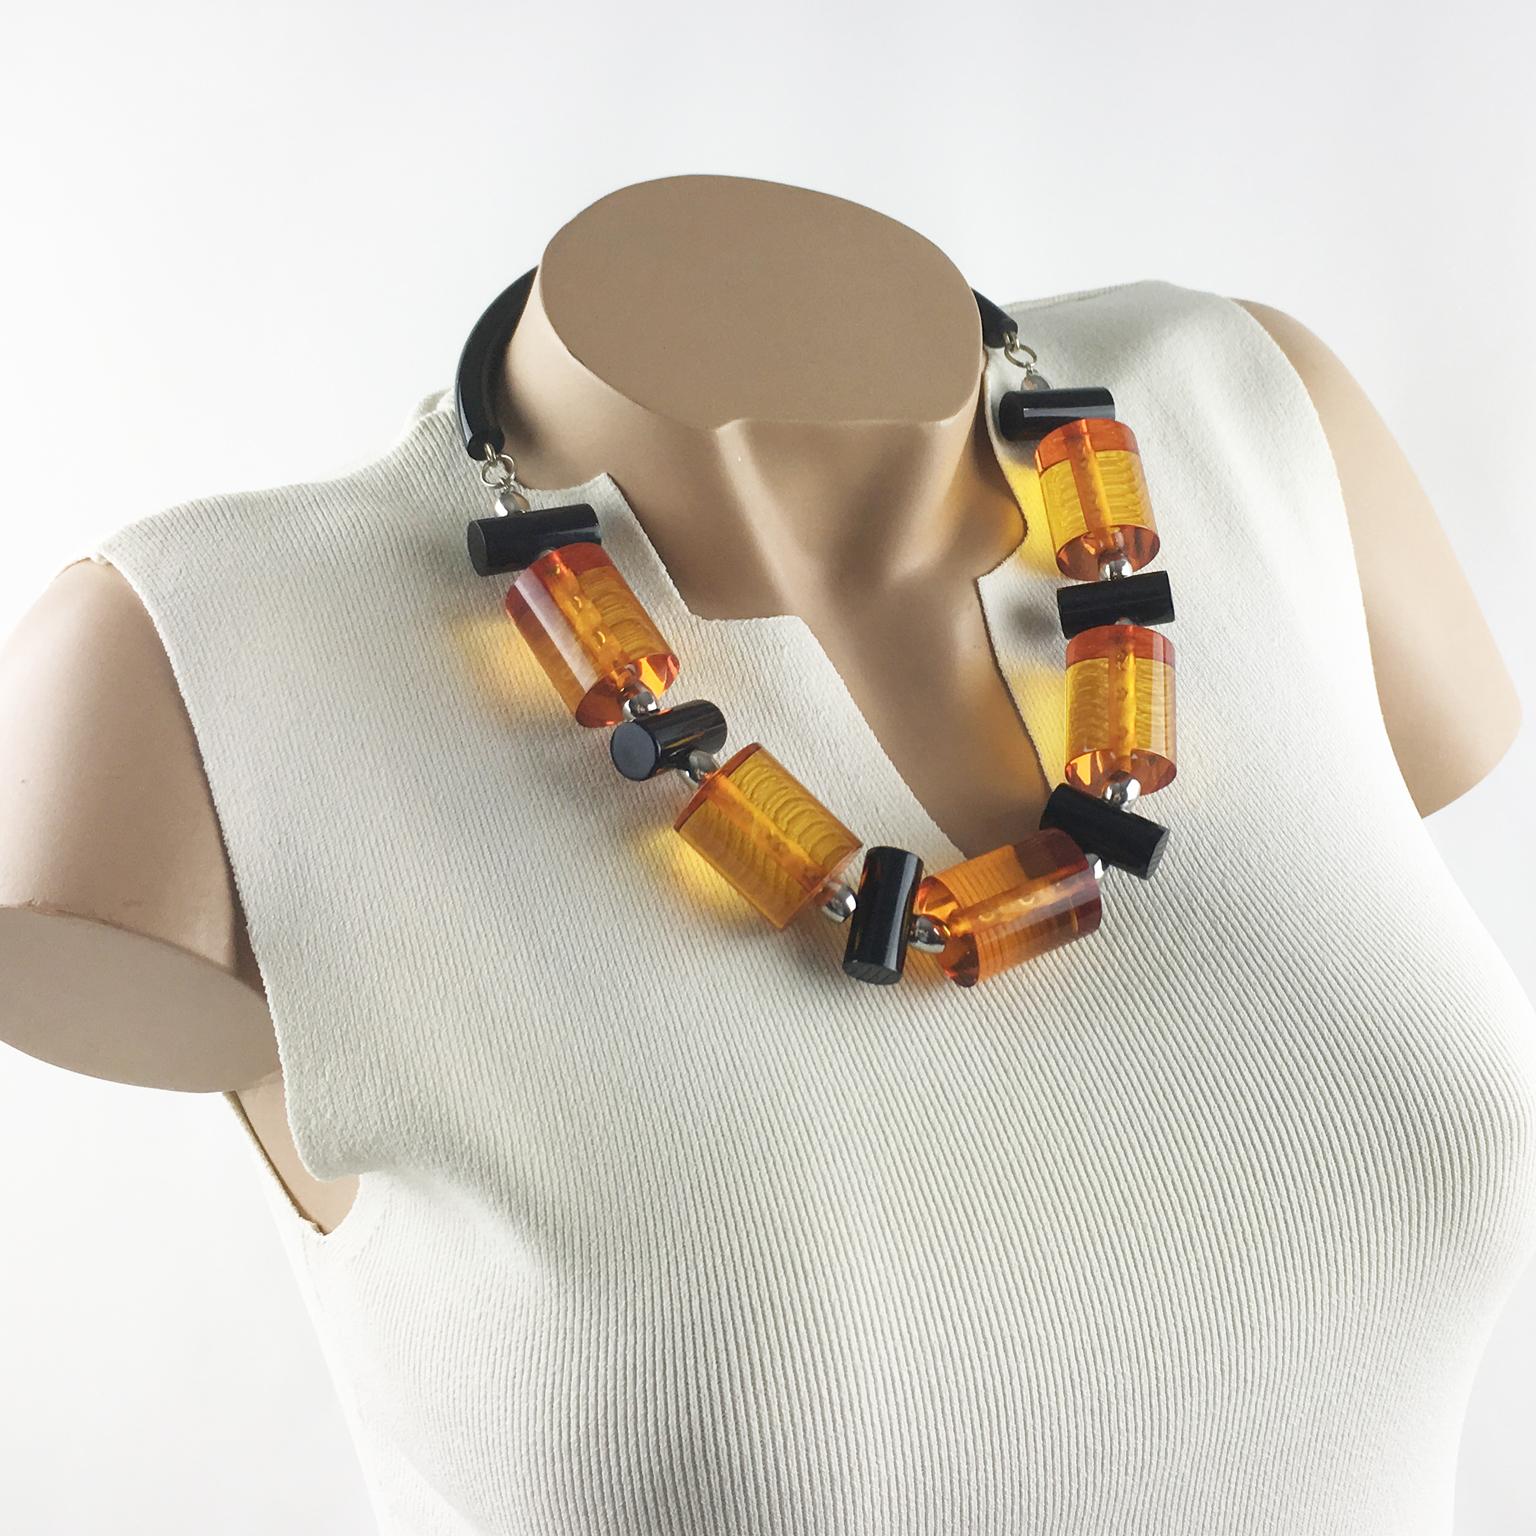 This fabulous Judith Hendler necklace from the 1980s is a stunning jewelry masterpiece. It has the iconic acrylic or Lucite neck tube ring, and from it are elegant geometric large beads Acri-gems in assorted colors of transparent orange and true